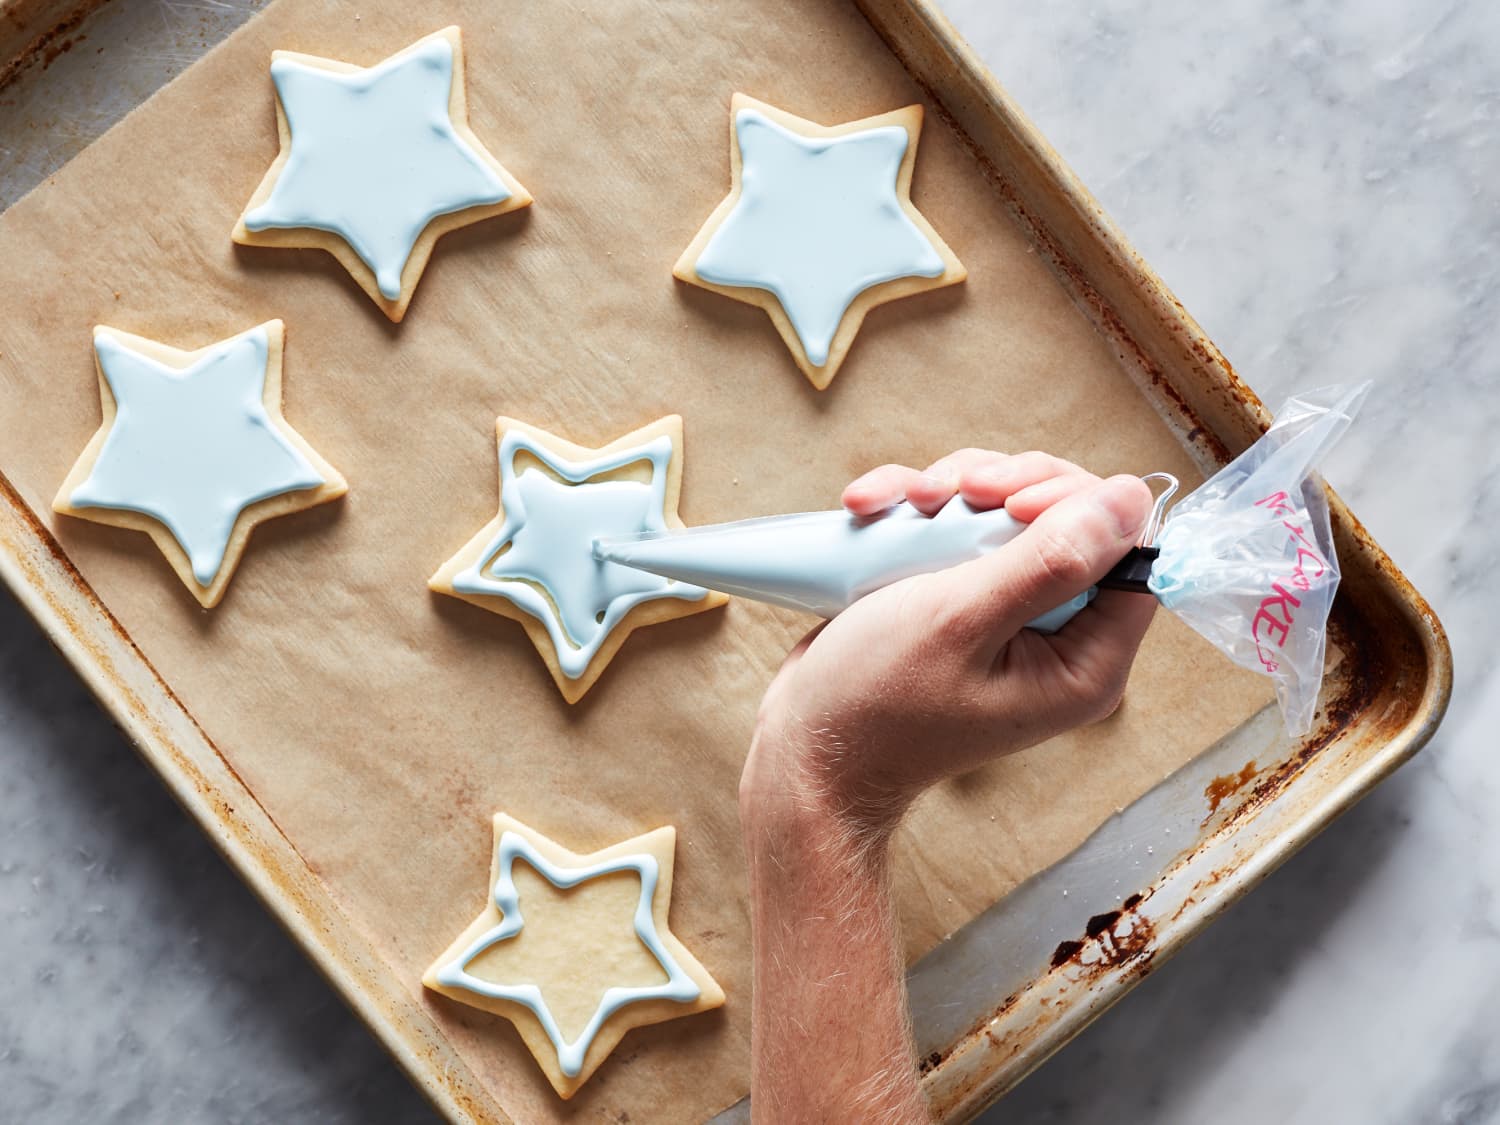 How to Make Easy Royal Icing for Cookie Decorating | The Kitchn